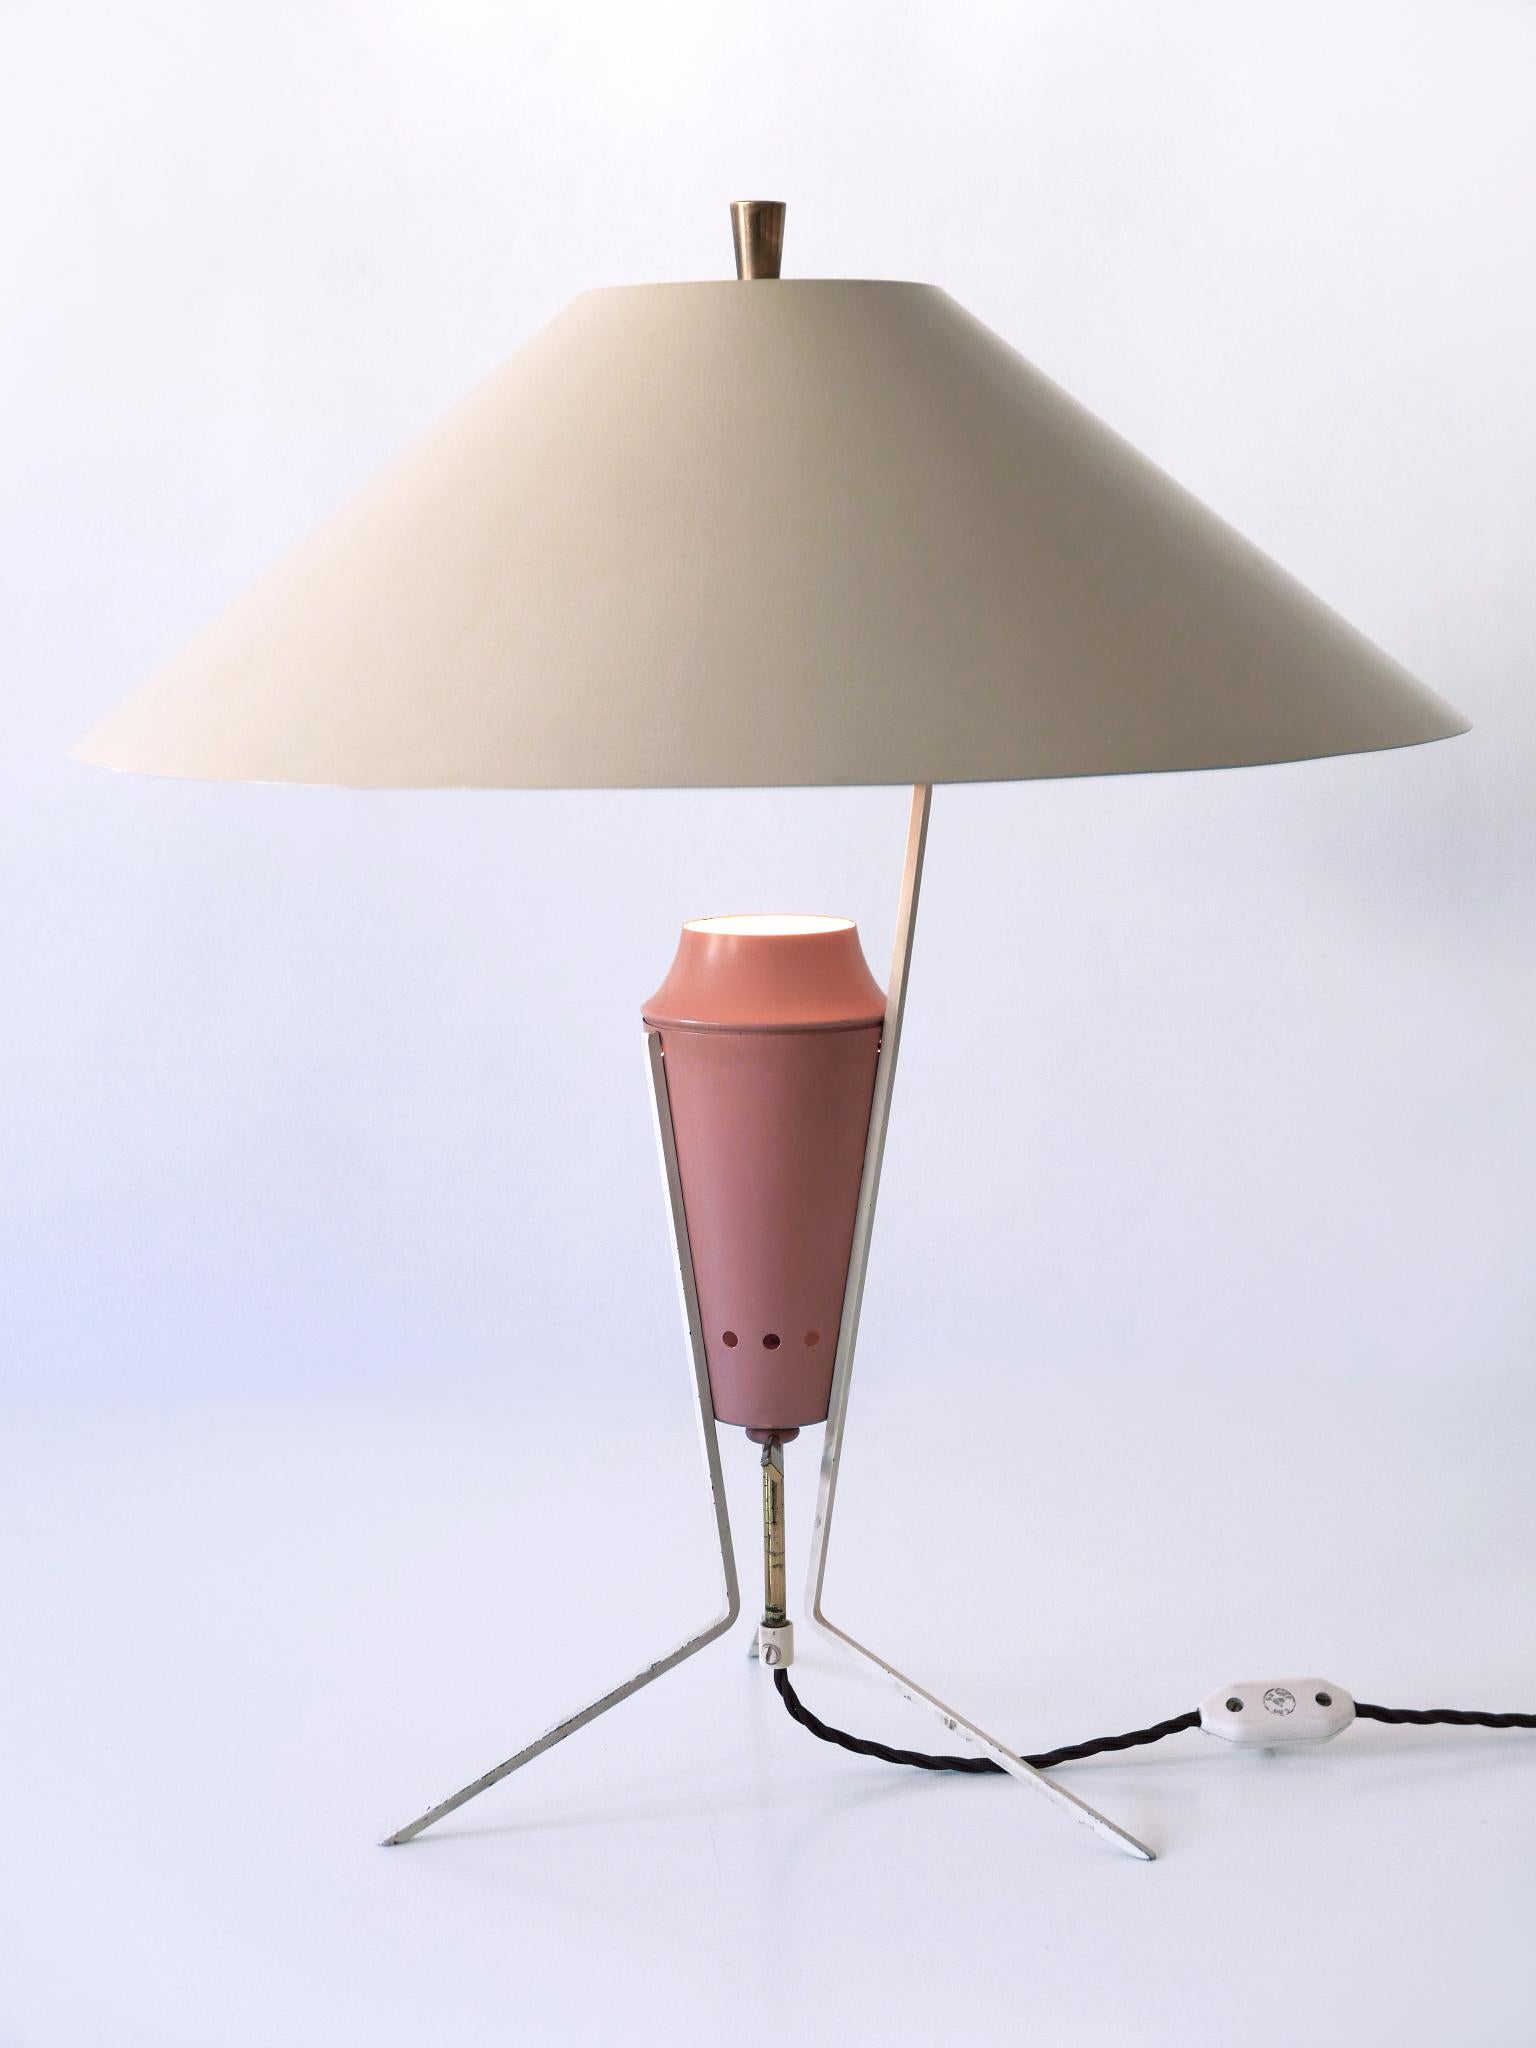 Enameled Exceptional Large & Elegant Mid Century Modern Table Lamp Germany 1950s For Sale